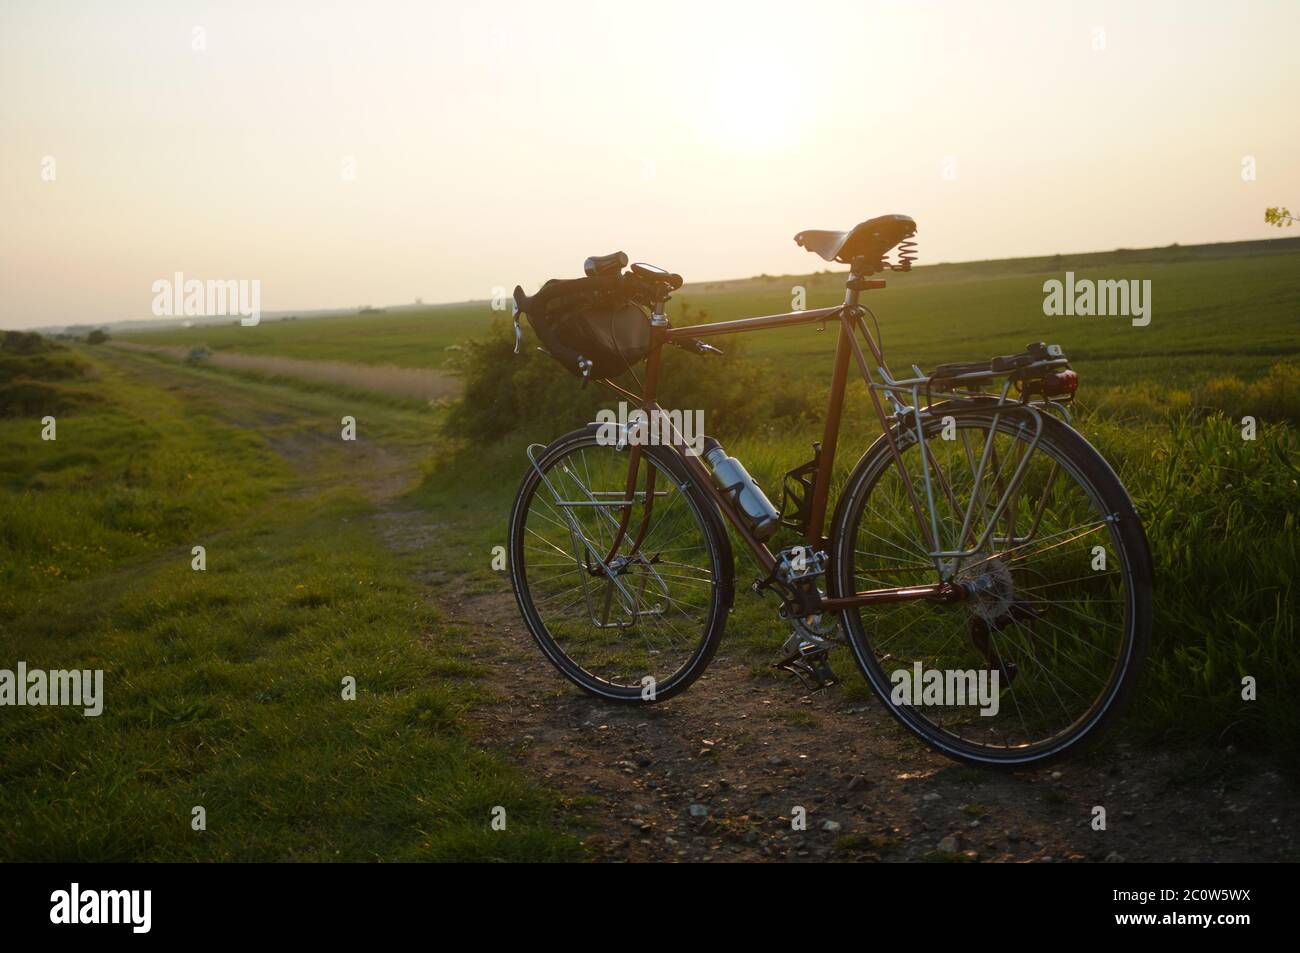 A bicycle ride on countryside trails. Stock Photo